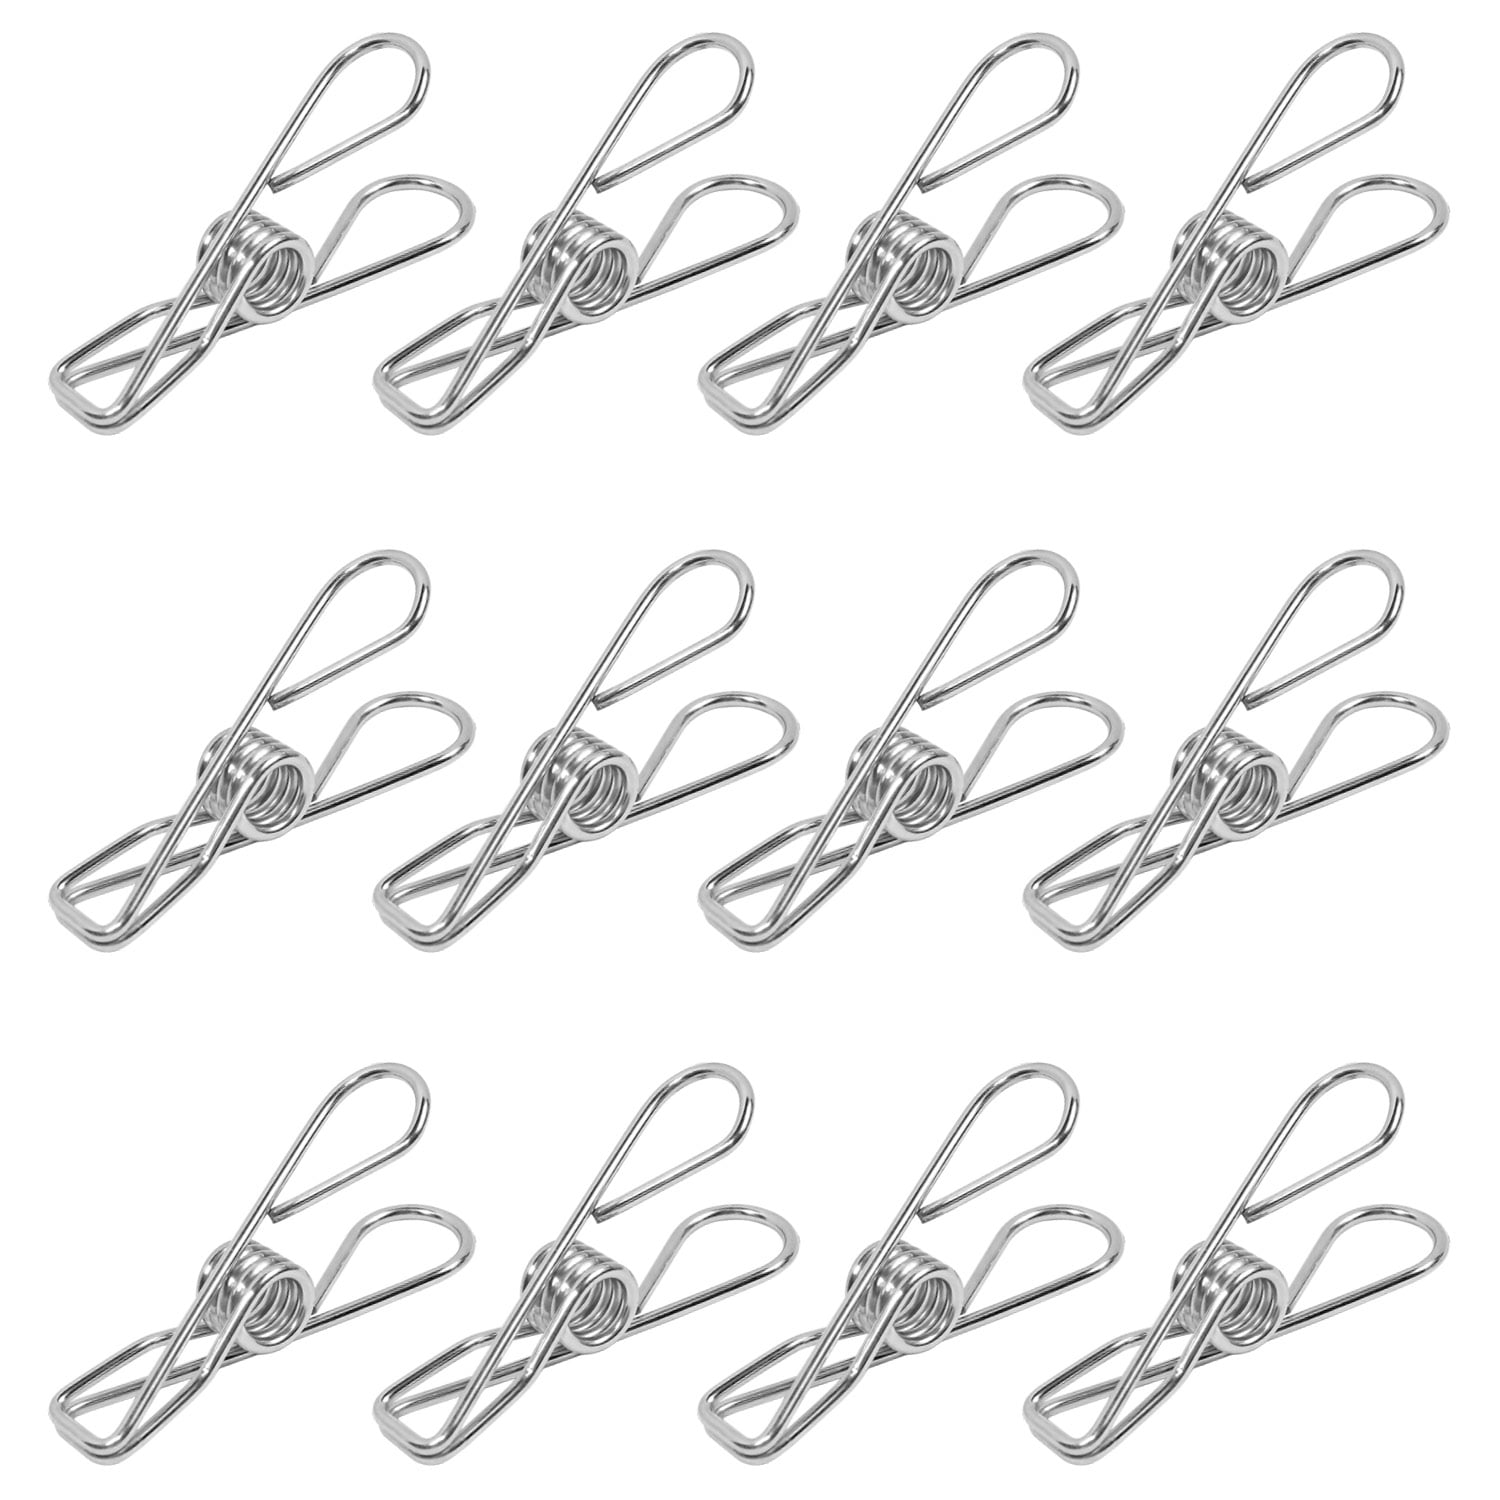 FEIGO 80pcs Stainless Steel Clothes Pins Multi-Purpose Stainless Steel Wire Hooks for Home/Office Cord Clothes Pins Utility Clips 